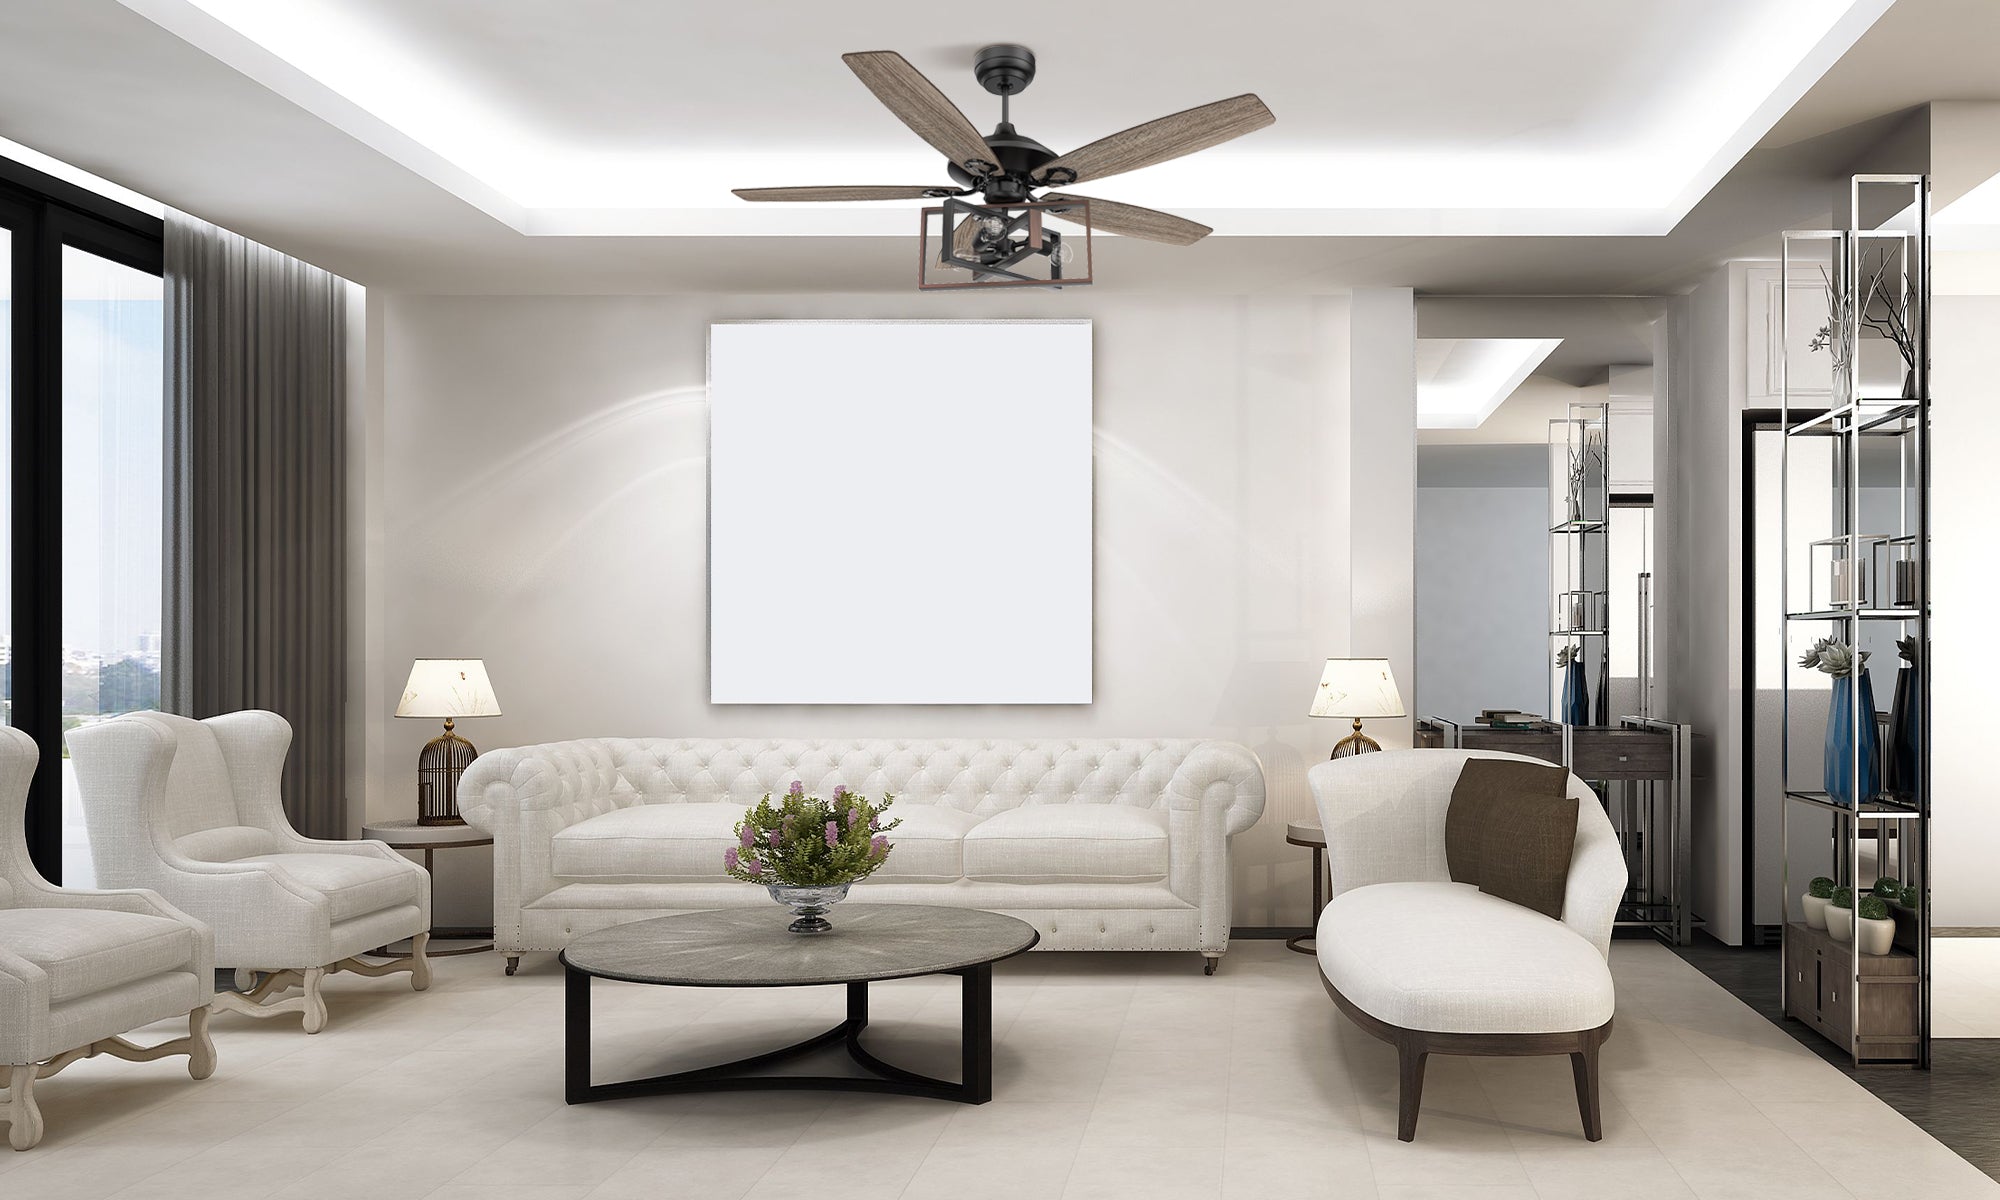 Smafan-Tustin-52''-Unique-Ceiling-Fan with-Remote-and-Ligh-Kit